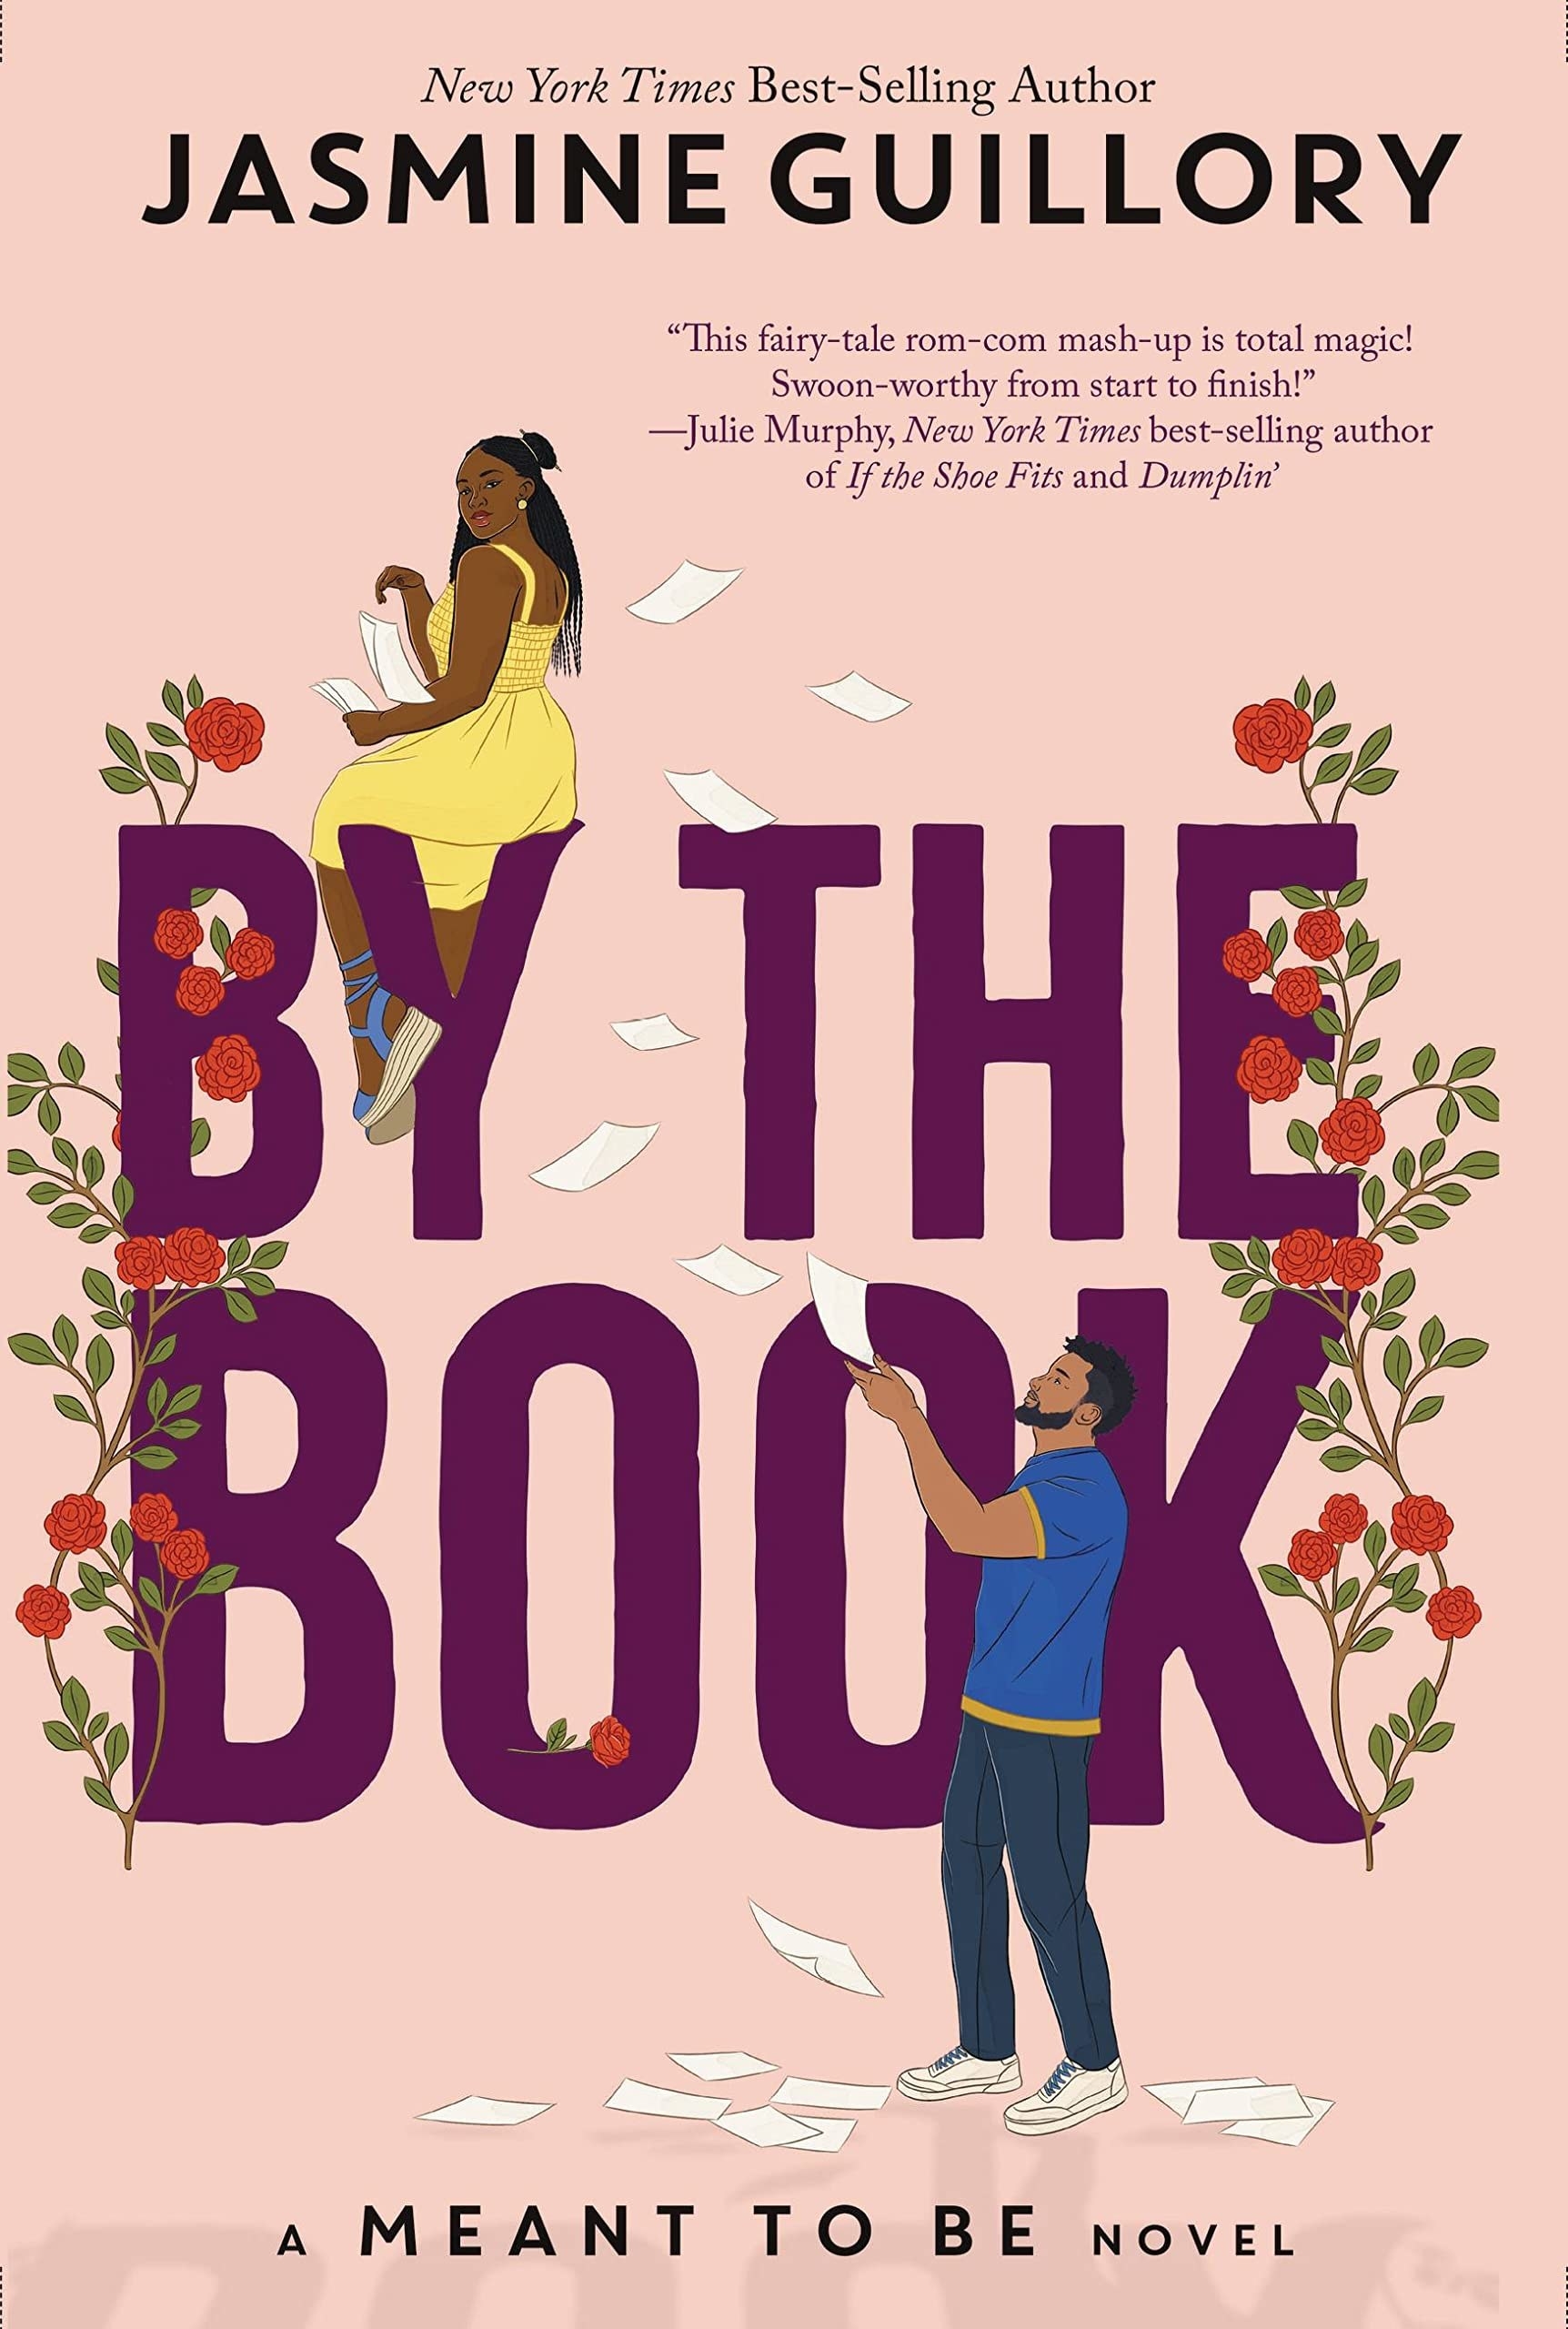 &quot;By the Book&quot; cover illustration of a woman sitting with pieces of paper falling from her hands and a guy standing below and grabbing them